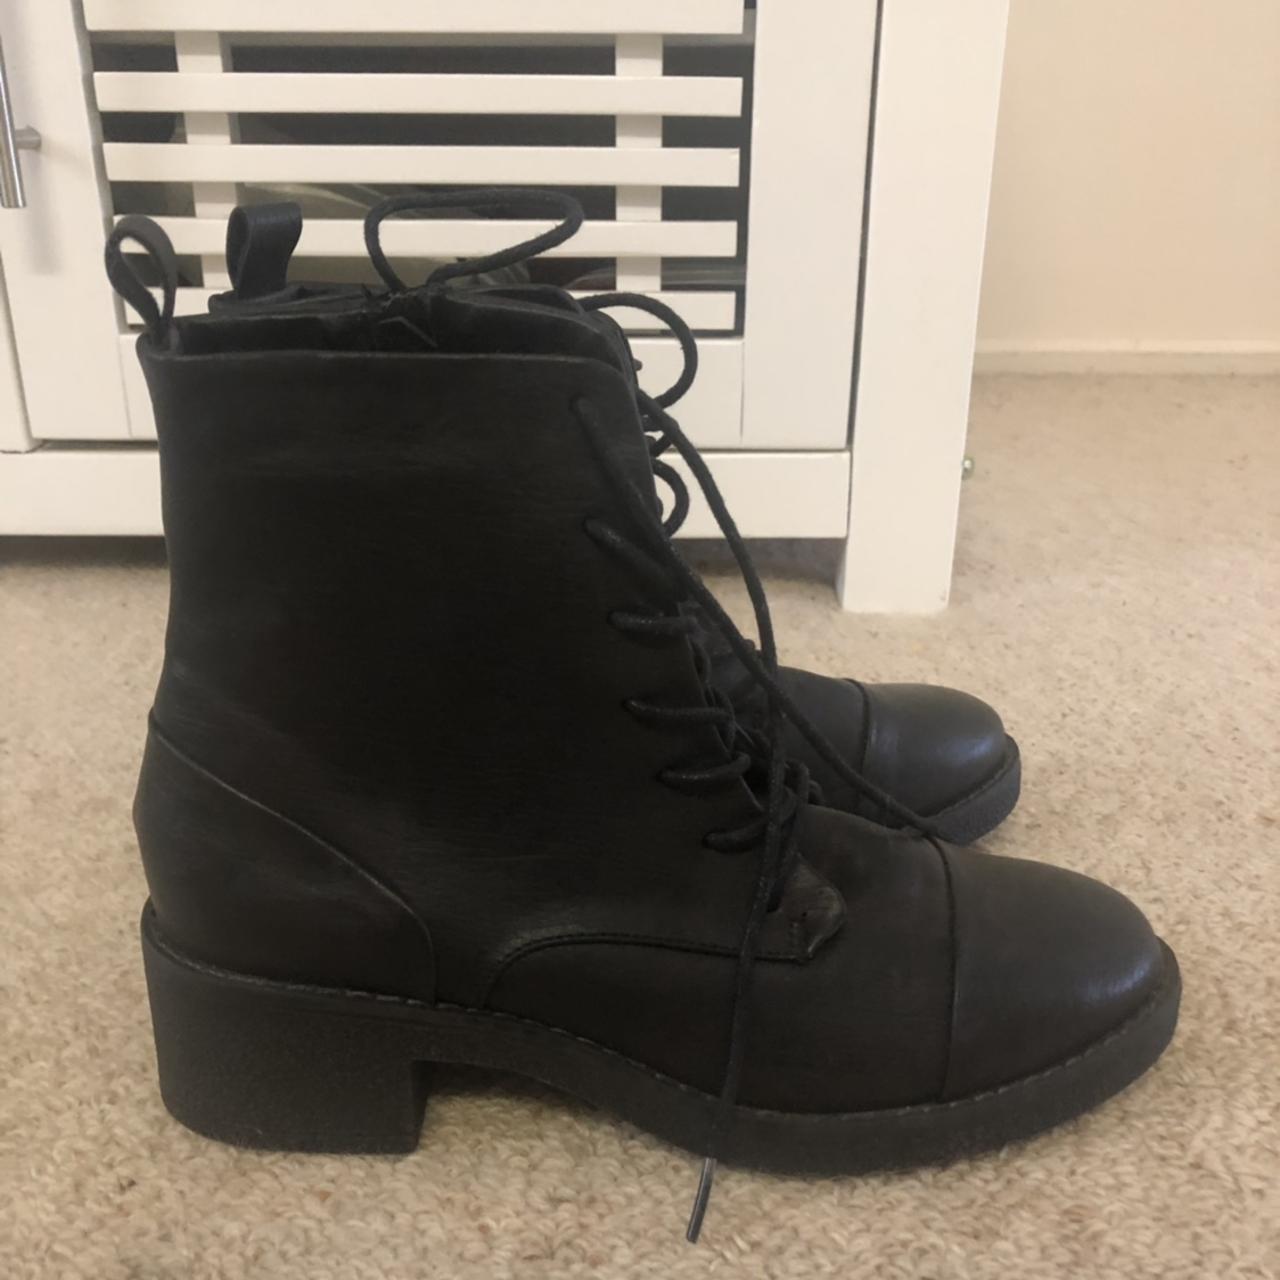 Betts boots, worn once, still in perfect condition,... - Depop